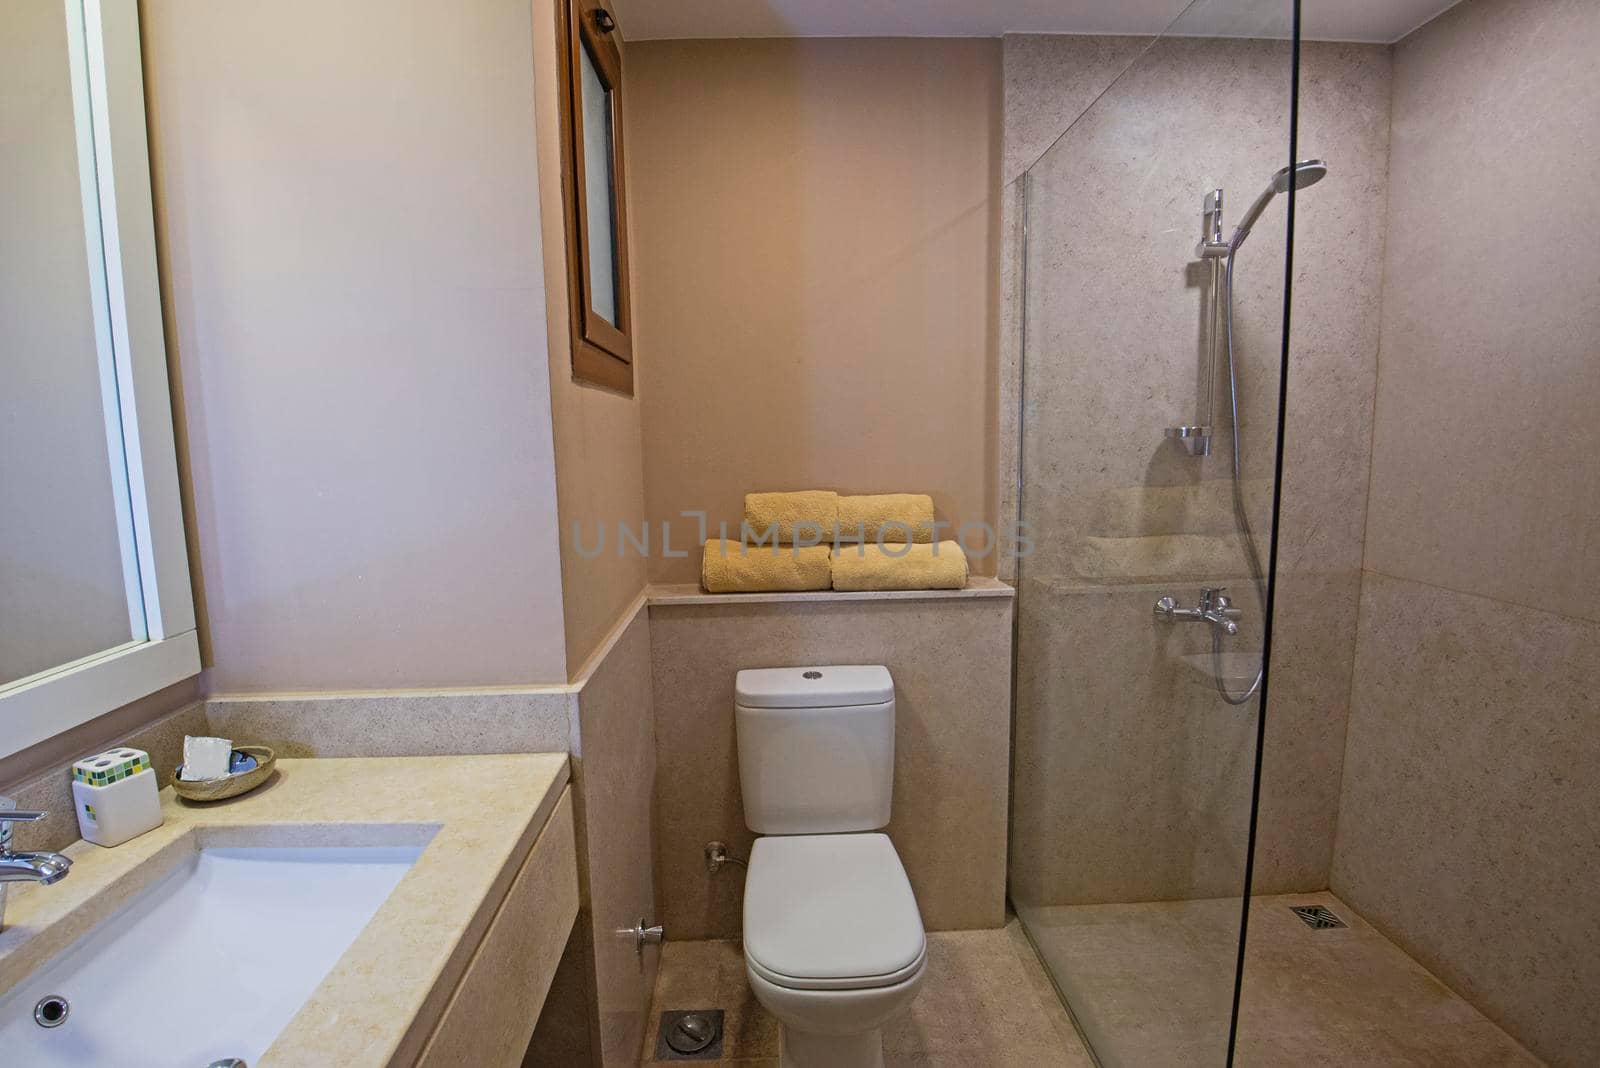 Interior design of a luxury show home bathroom with glass shower cubicle sink and toilet